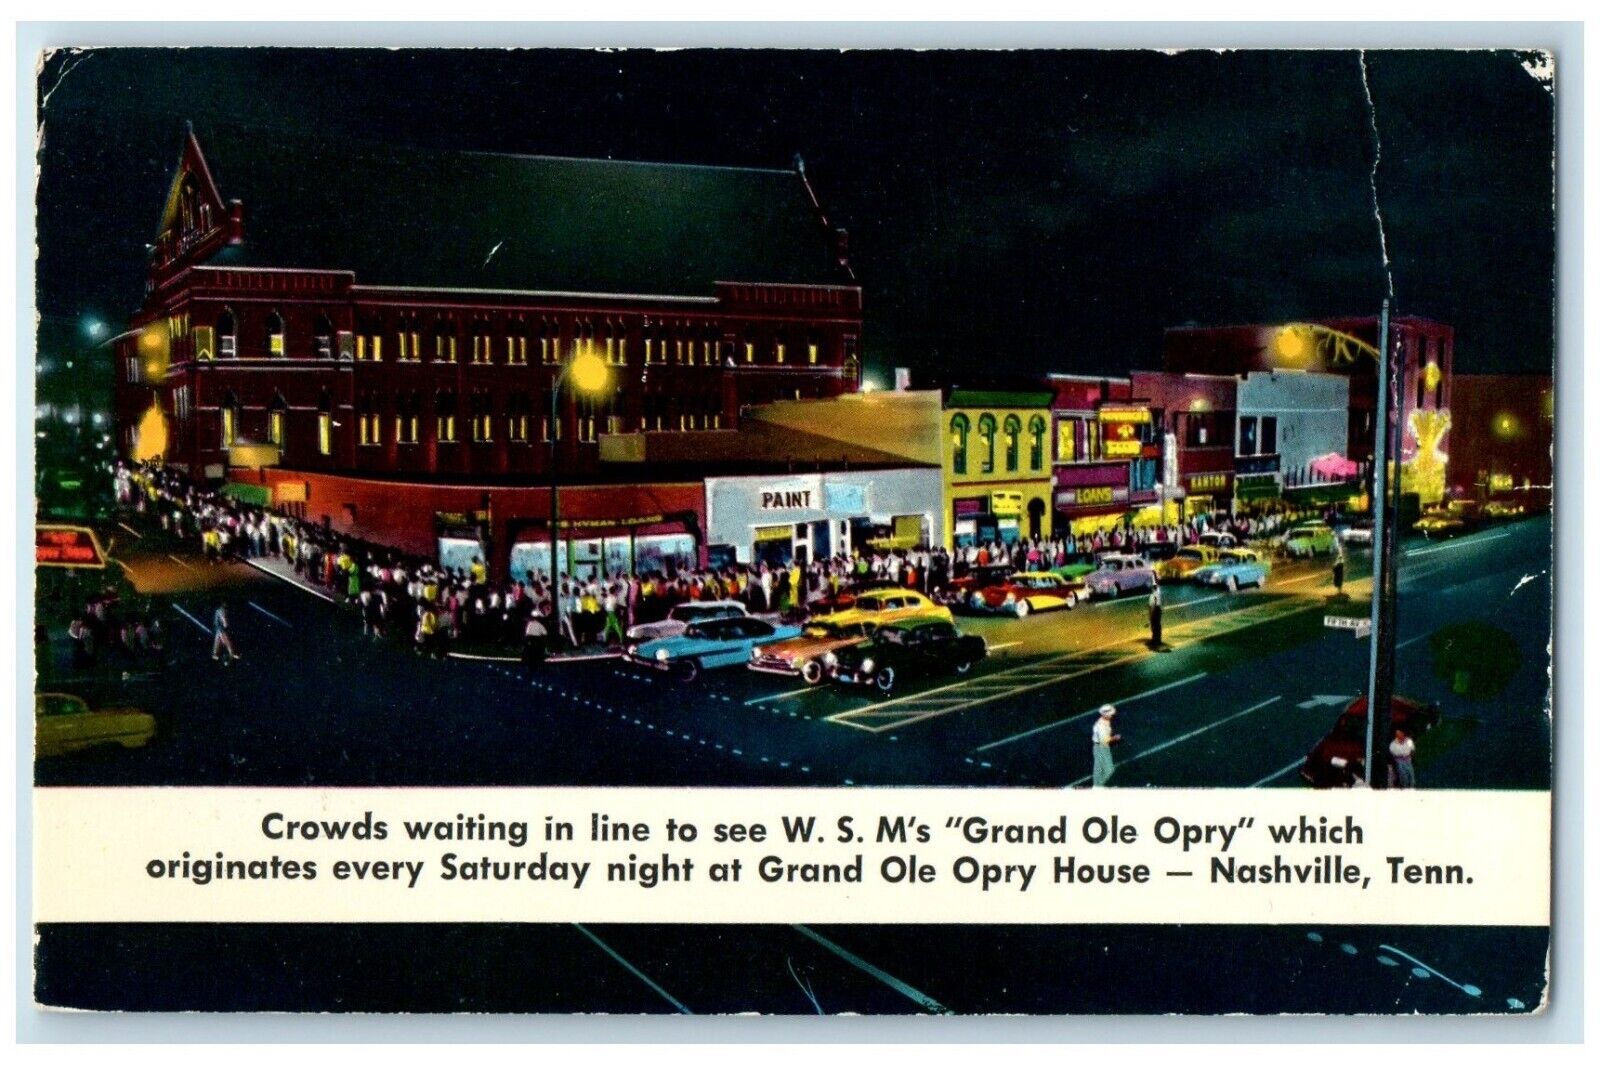 1981 Grand Oley Opry House Night Exterior Nashville Tennessee Vintage Postcard